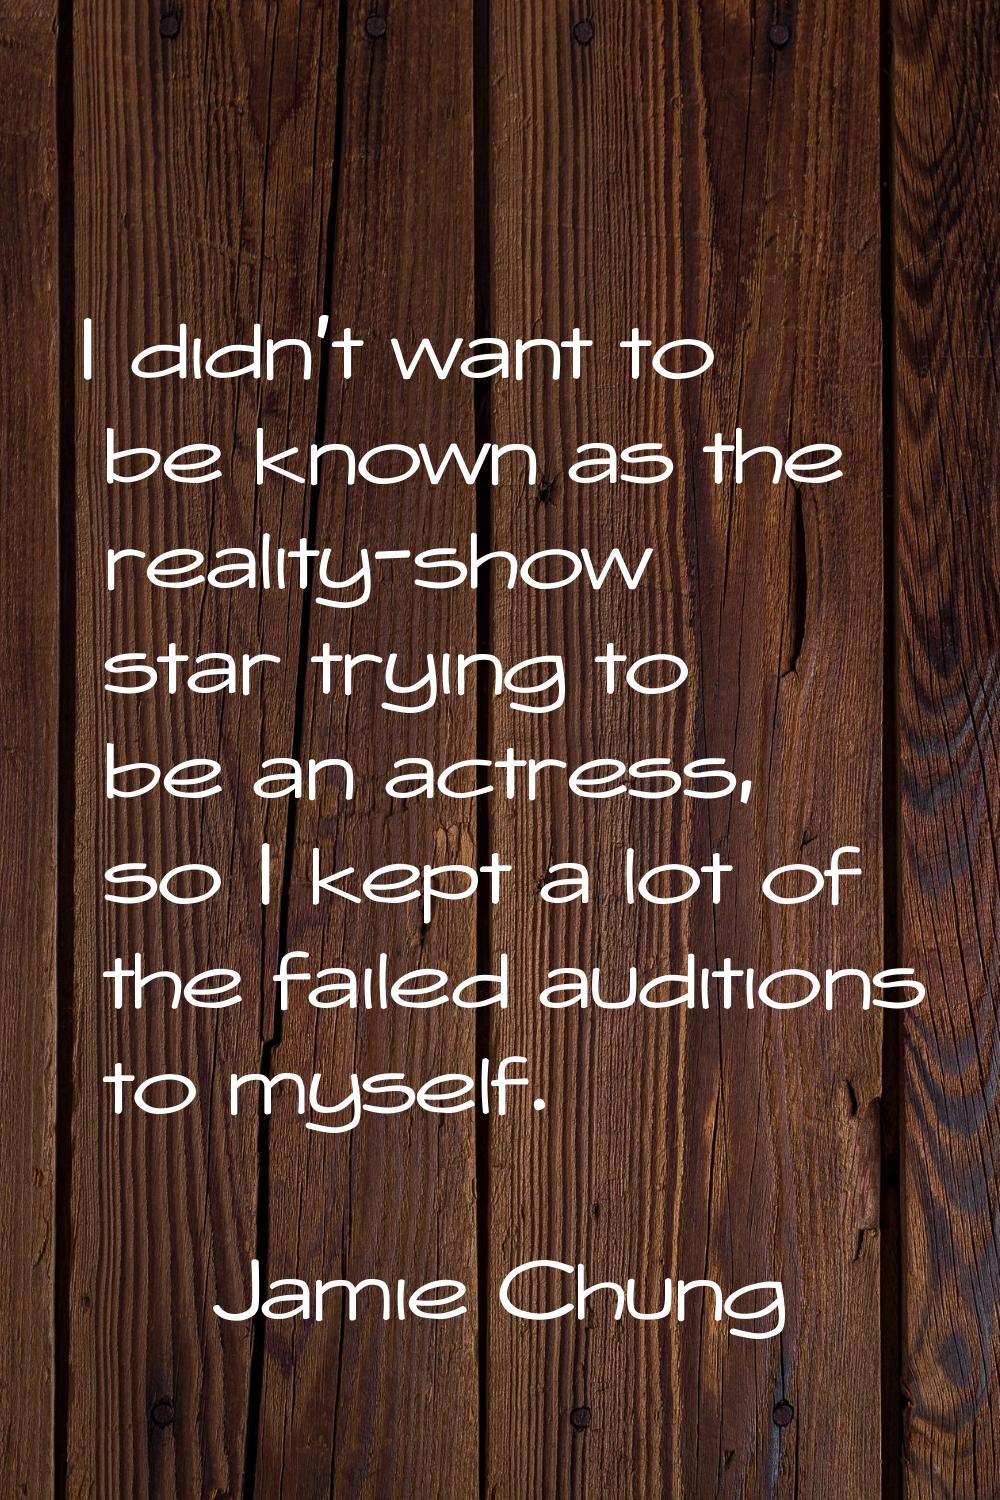 I didn't want to be known as the reality-show star trying to be an actress, so I kept a lot of the 